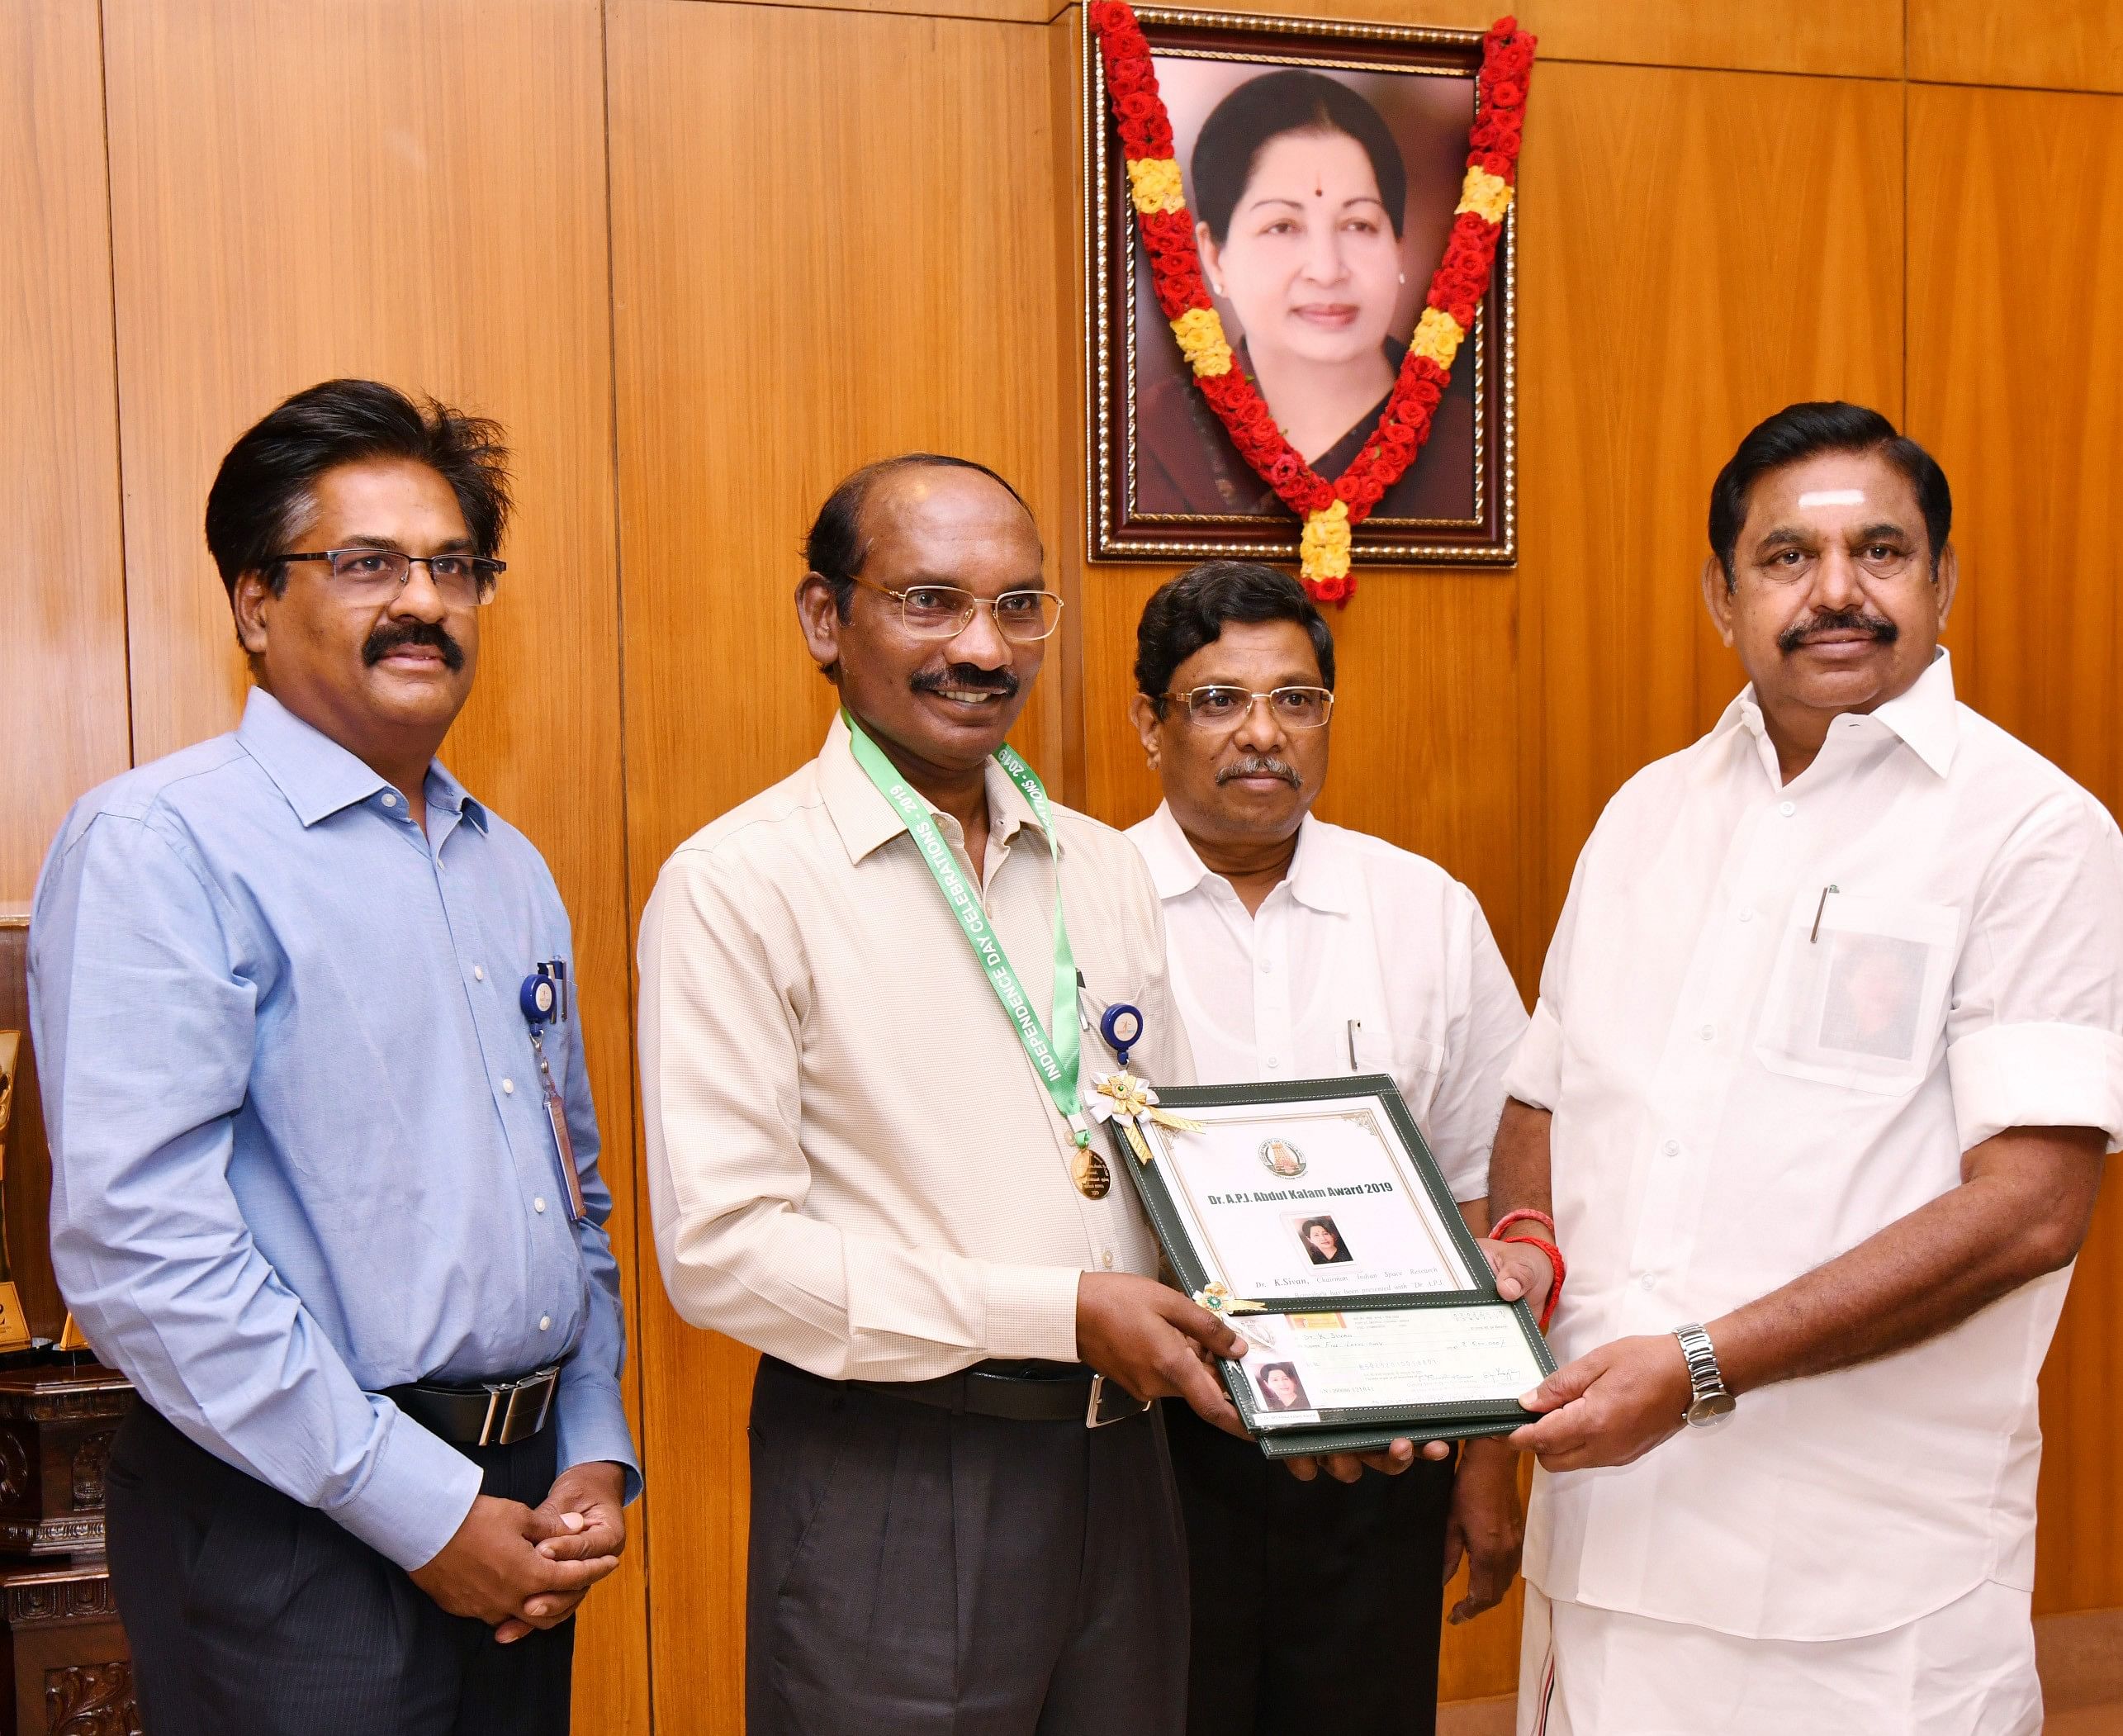 Isro chief Dr K Sivan receiving Dr A P J Abdul Kalam award for scientific growth from Tamil Nadu Chief Minister Edappadi K Palaniswami here on Thursday. DH Photo